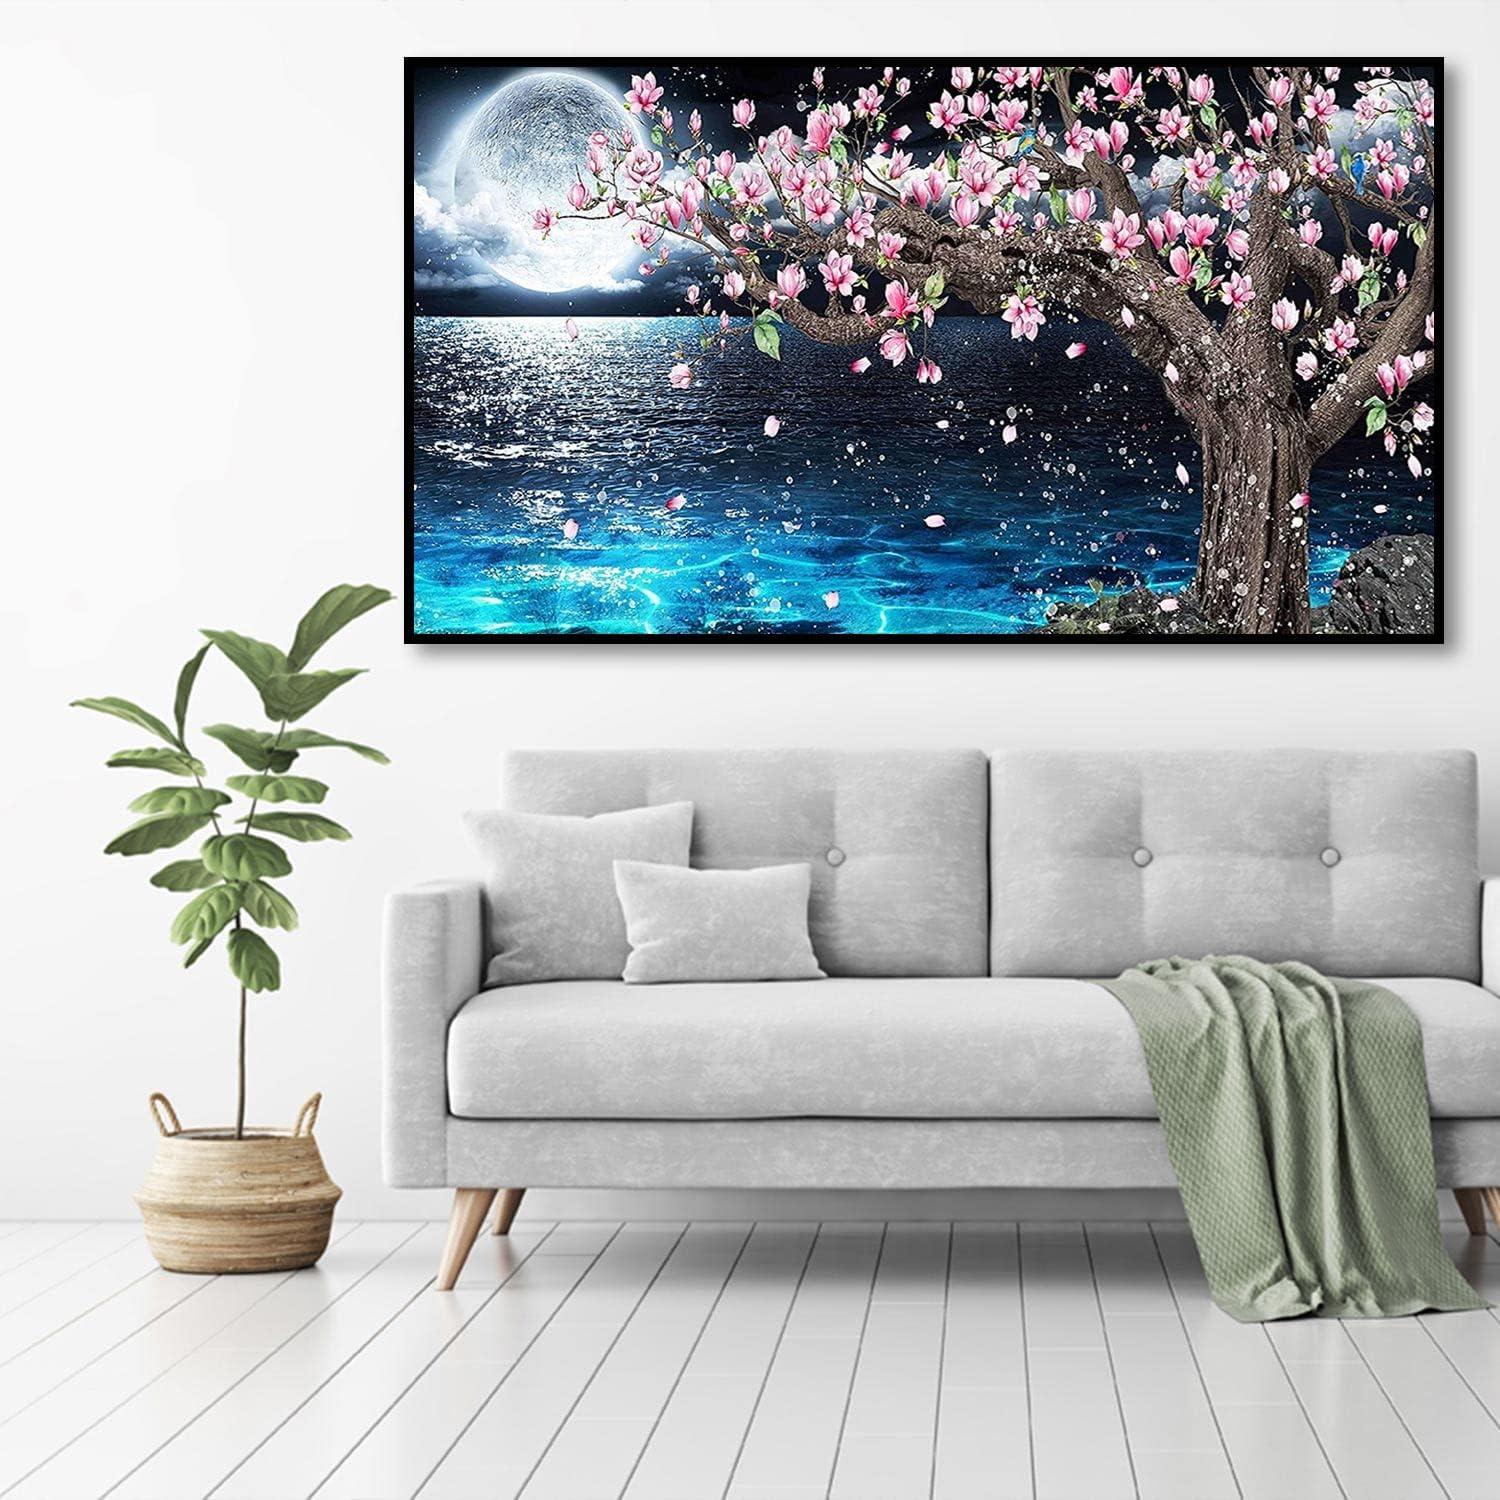  Japanese Cherry Tree Blossom Diamond Painting Kits Square Drill  Cross Stitch Pictures Wall Art Decor 8x12 : Arts, Crafts & Sewing